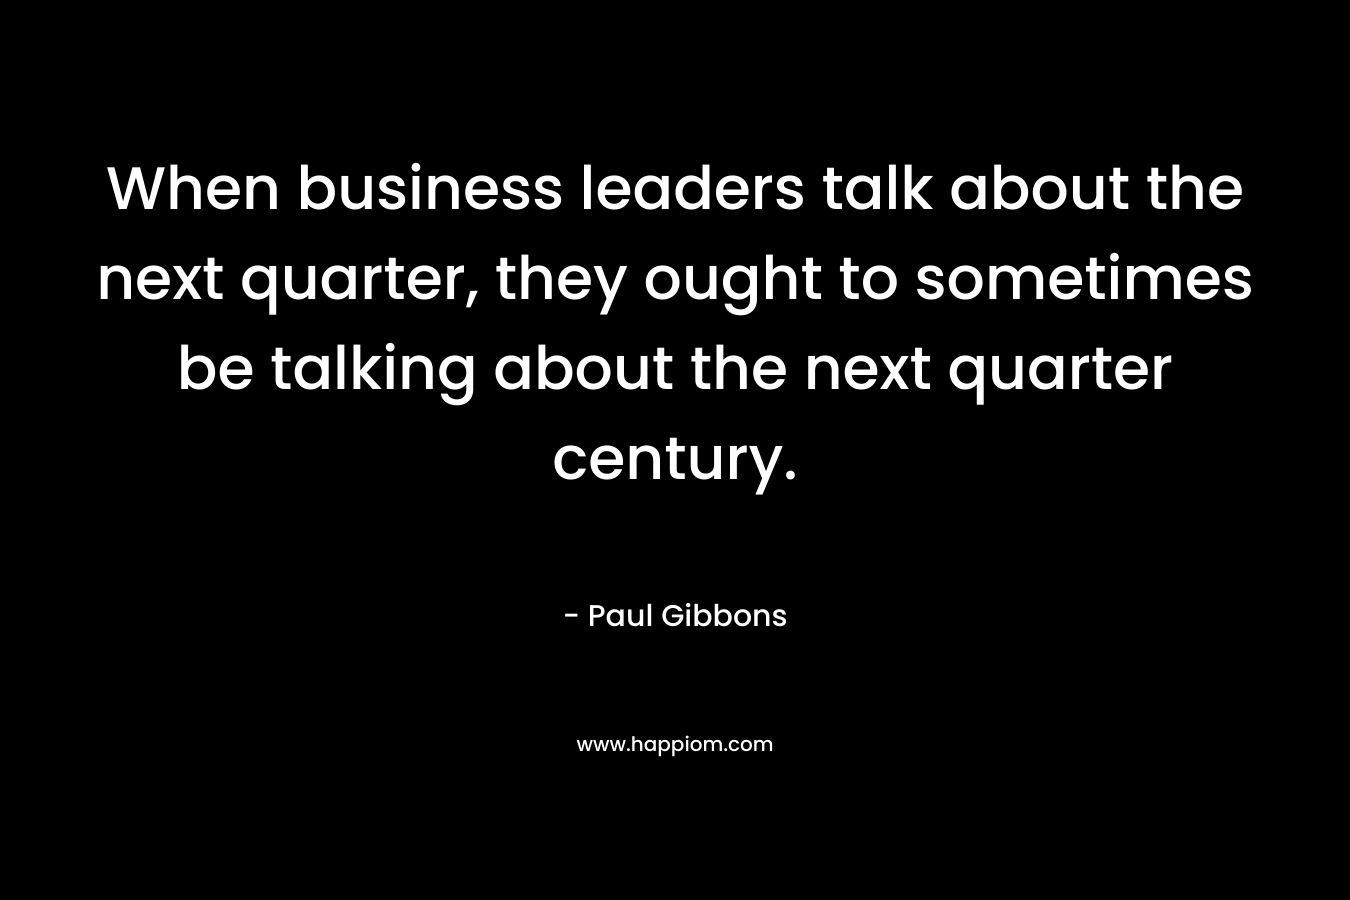 When business leaders talk about the next quarter, they ought to sometimes be talking about the next quarter century.